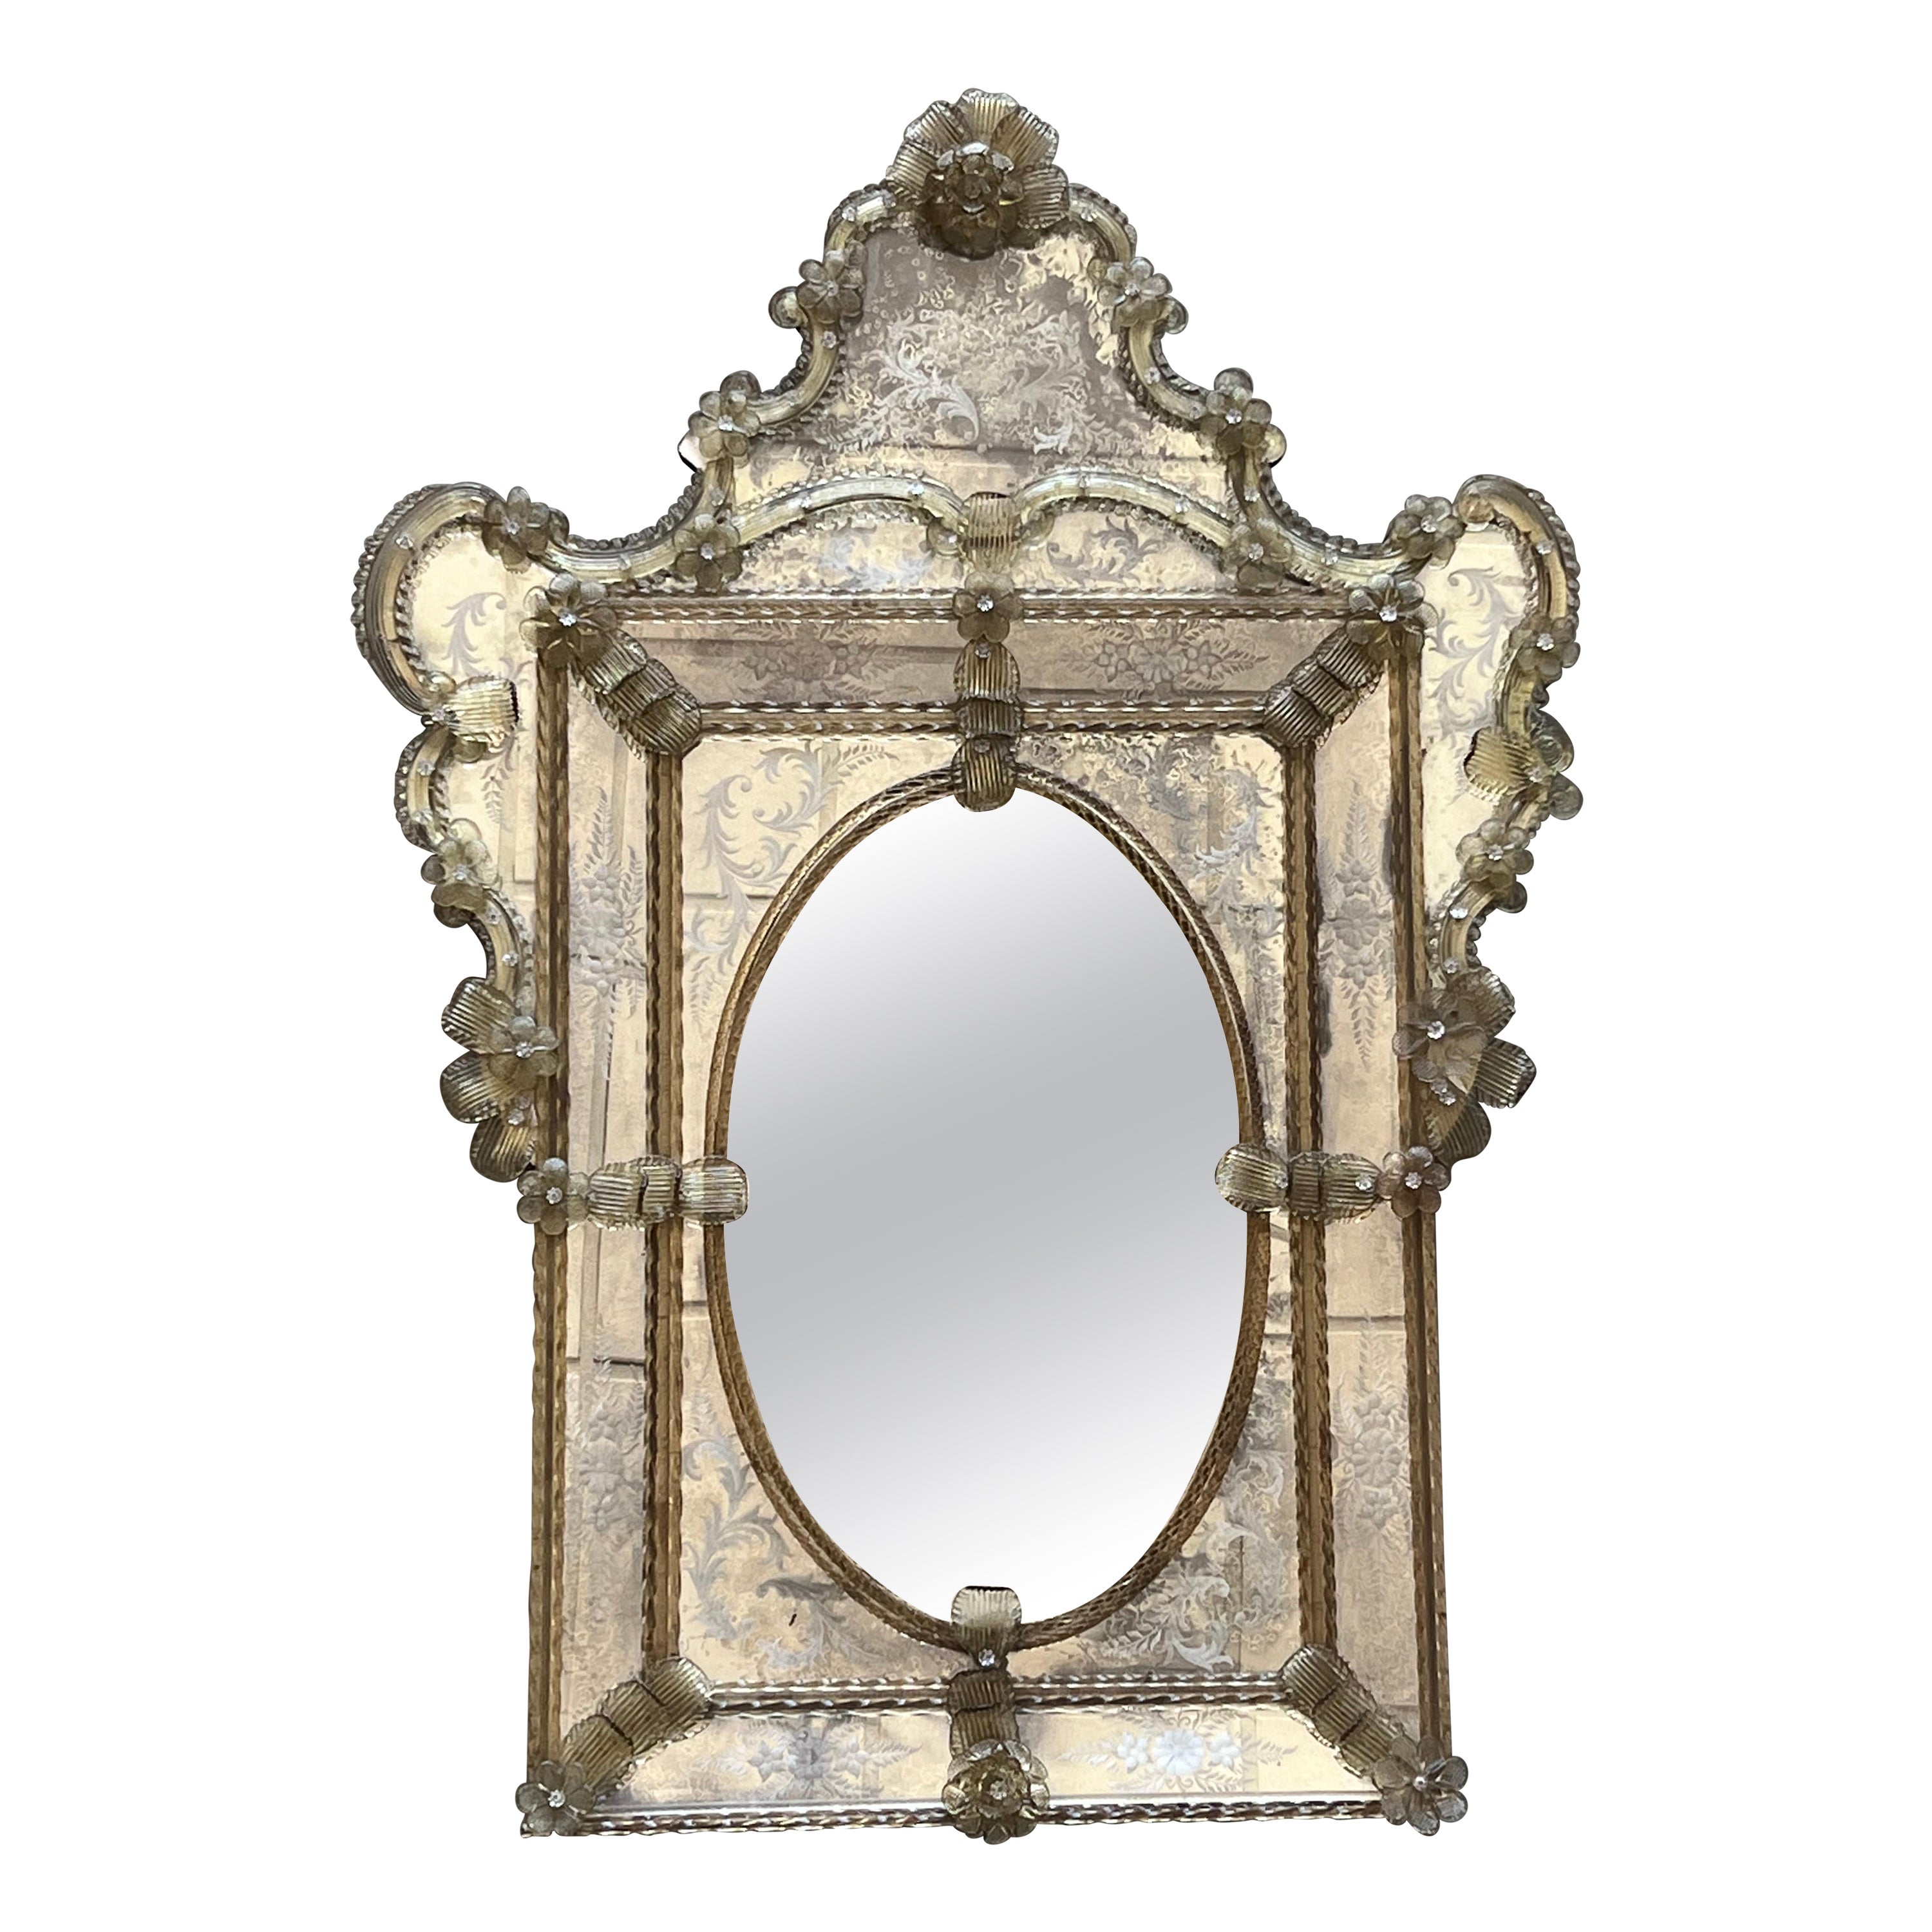 18th Century Crest Top Venetian Rectangular Mirror, Handmade and Hand Silvered For Sale